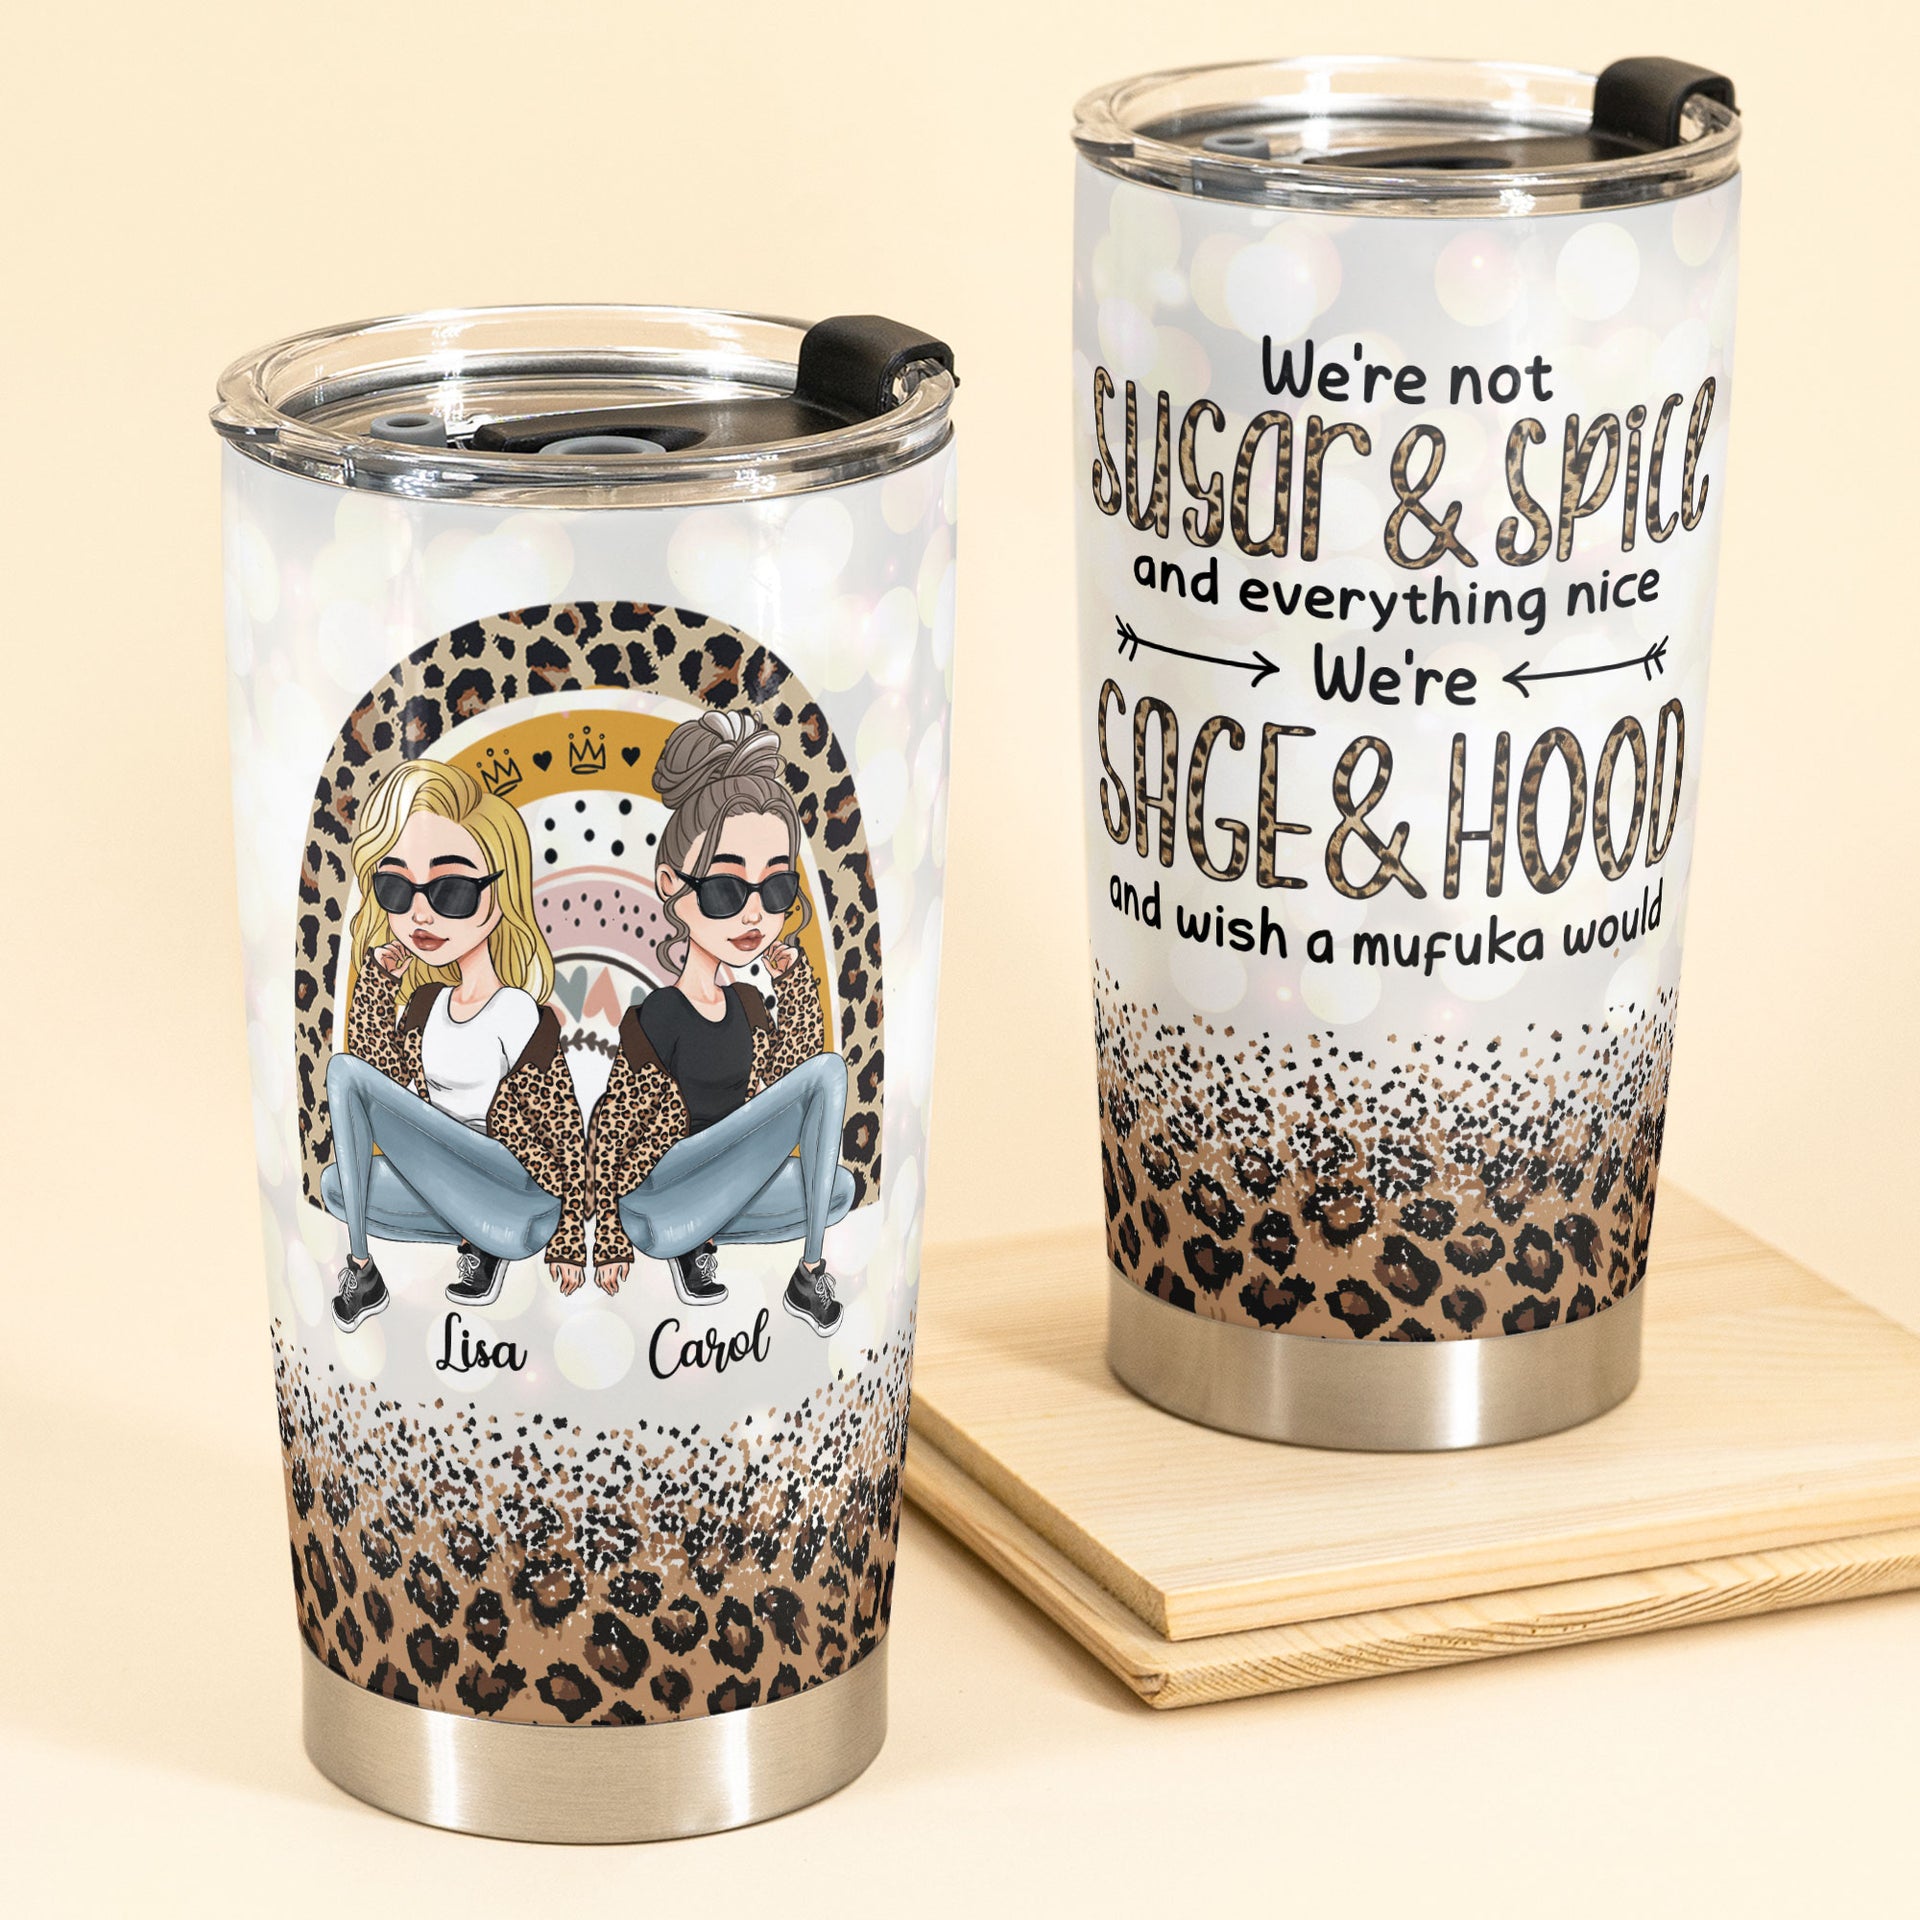 https://macorner.co/cdn/shop/products/Were-Sage-And-Hood-Wish-A-Mufuka-Would-Personalized-Tumbler-Cup-Birthday-Christmas-Gift-For-Besties-BFF-Soul-Sisters-Sistas_1.jpg?v=1664513348&width=1920